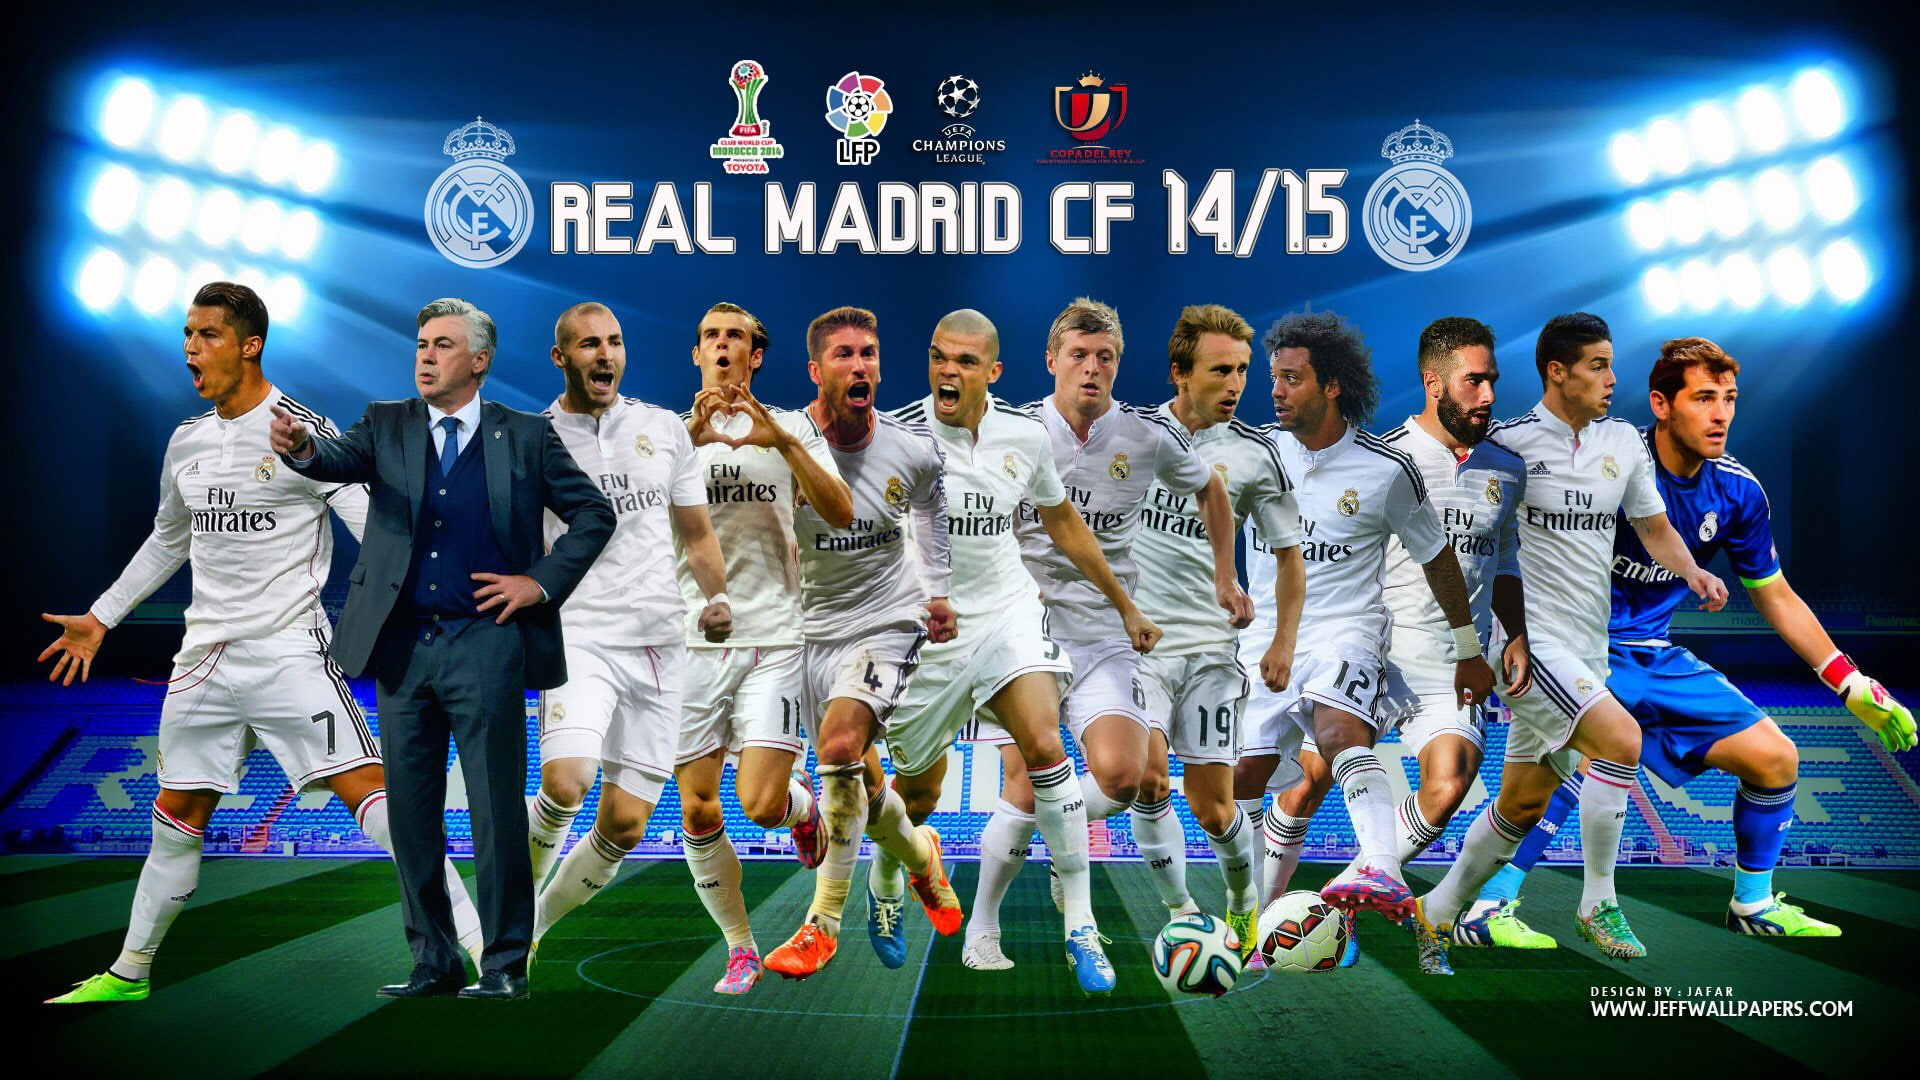 real-madrid-cf-2014-2015-first-11-team